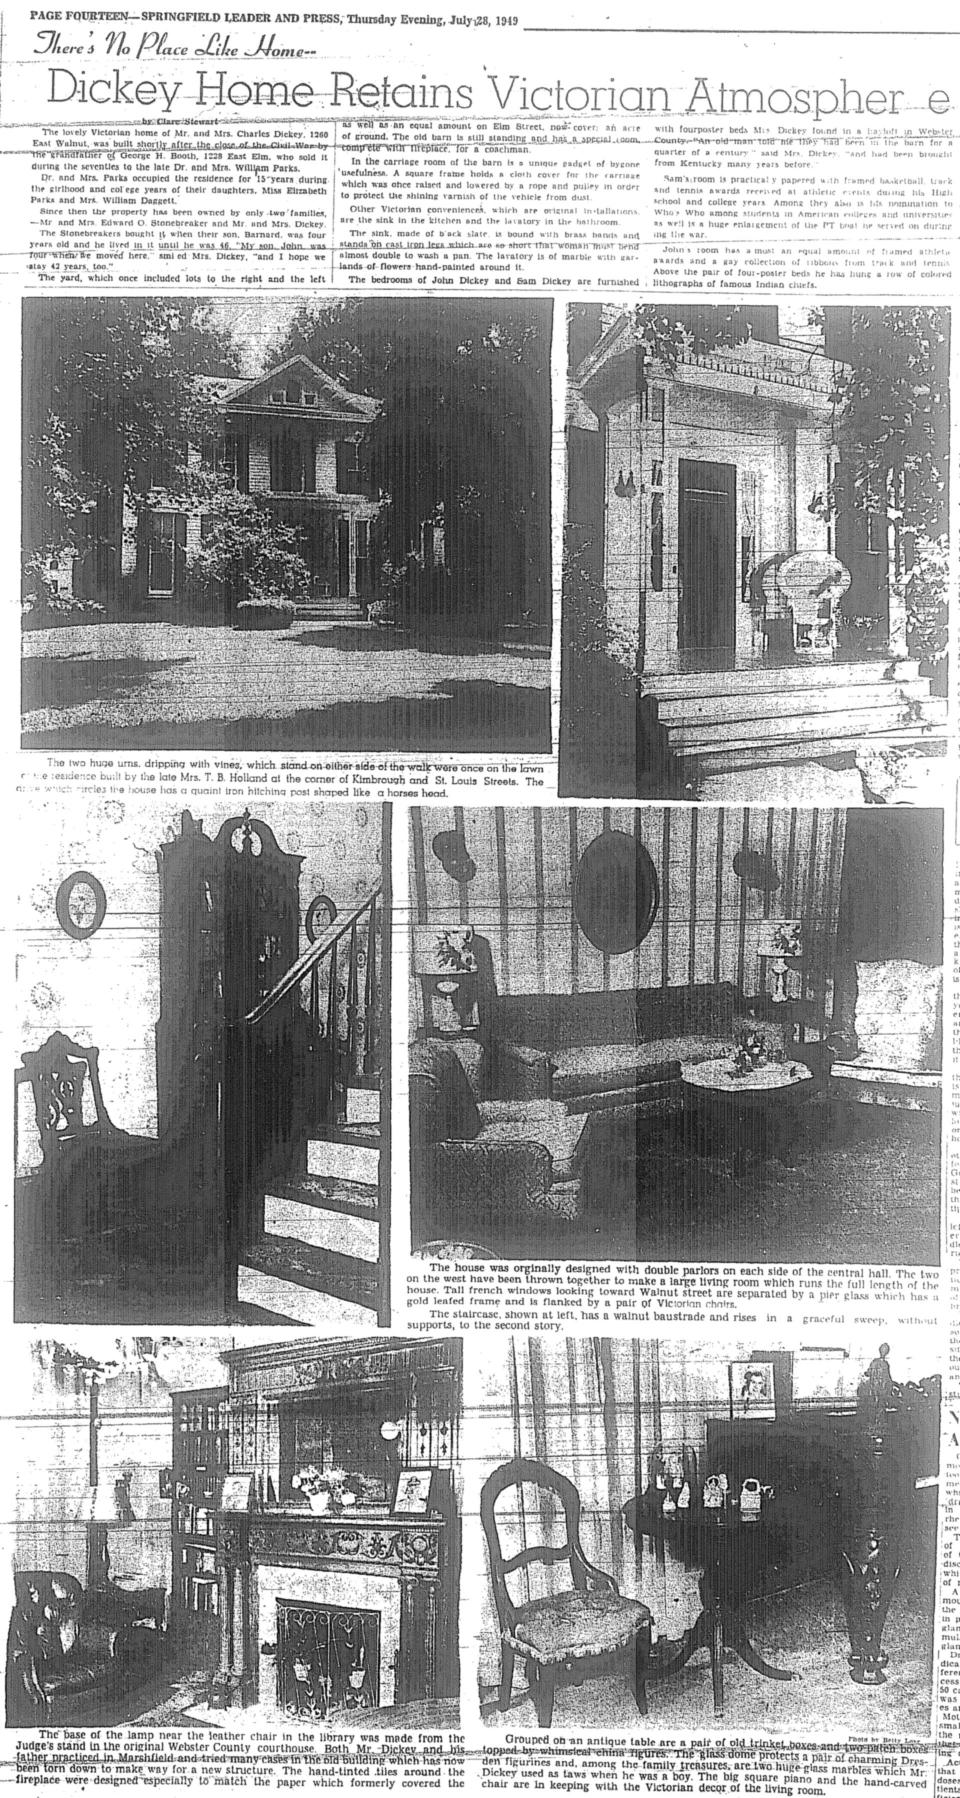 A feature on the "Dickey House" at 1260 E. Walnut St. from a July 28, 1949 issue of the Springfield Leader and Press.